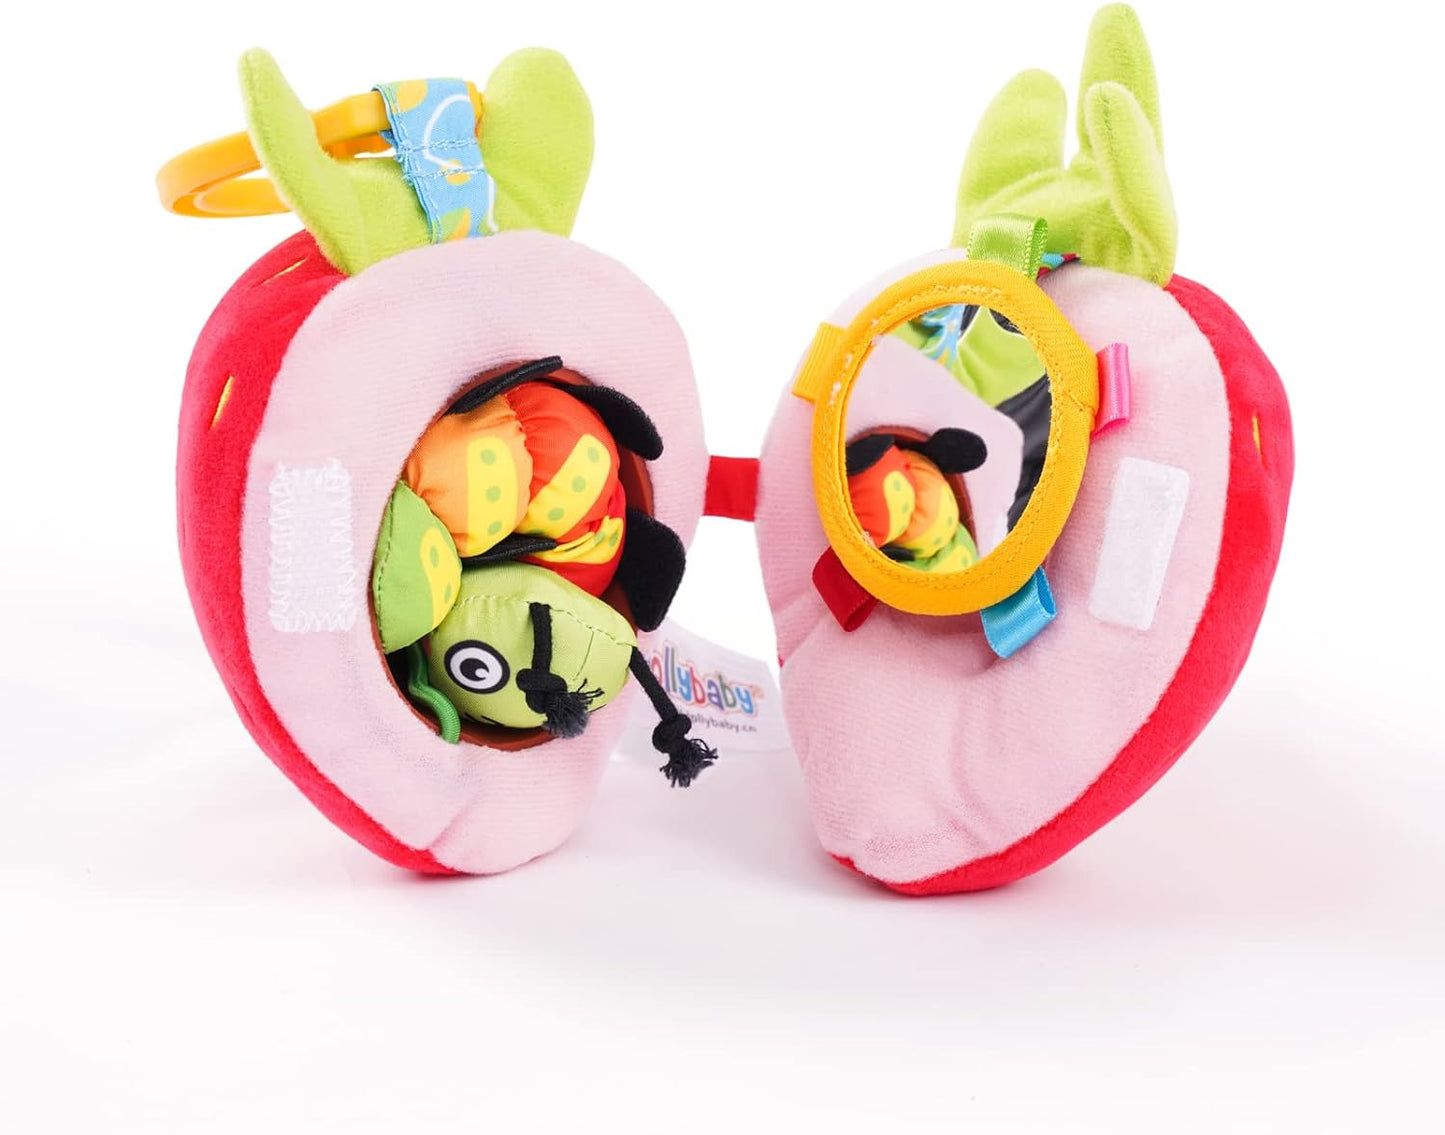 Baby Plush Fruit Doll Toys, Caterpillar Eating Fruit Stuffed Cartoon Snuggle Travel Activity Toy with Rattle, Gift for Infant boy & Girl 3 Months+(Avocado Squish)